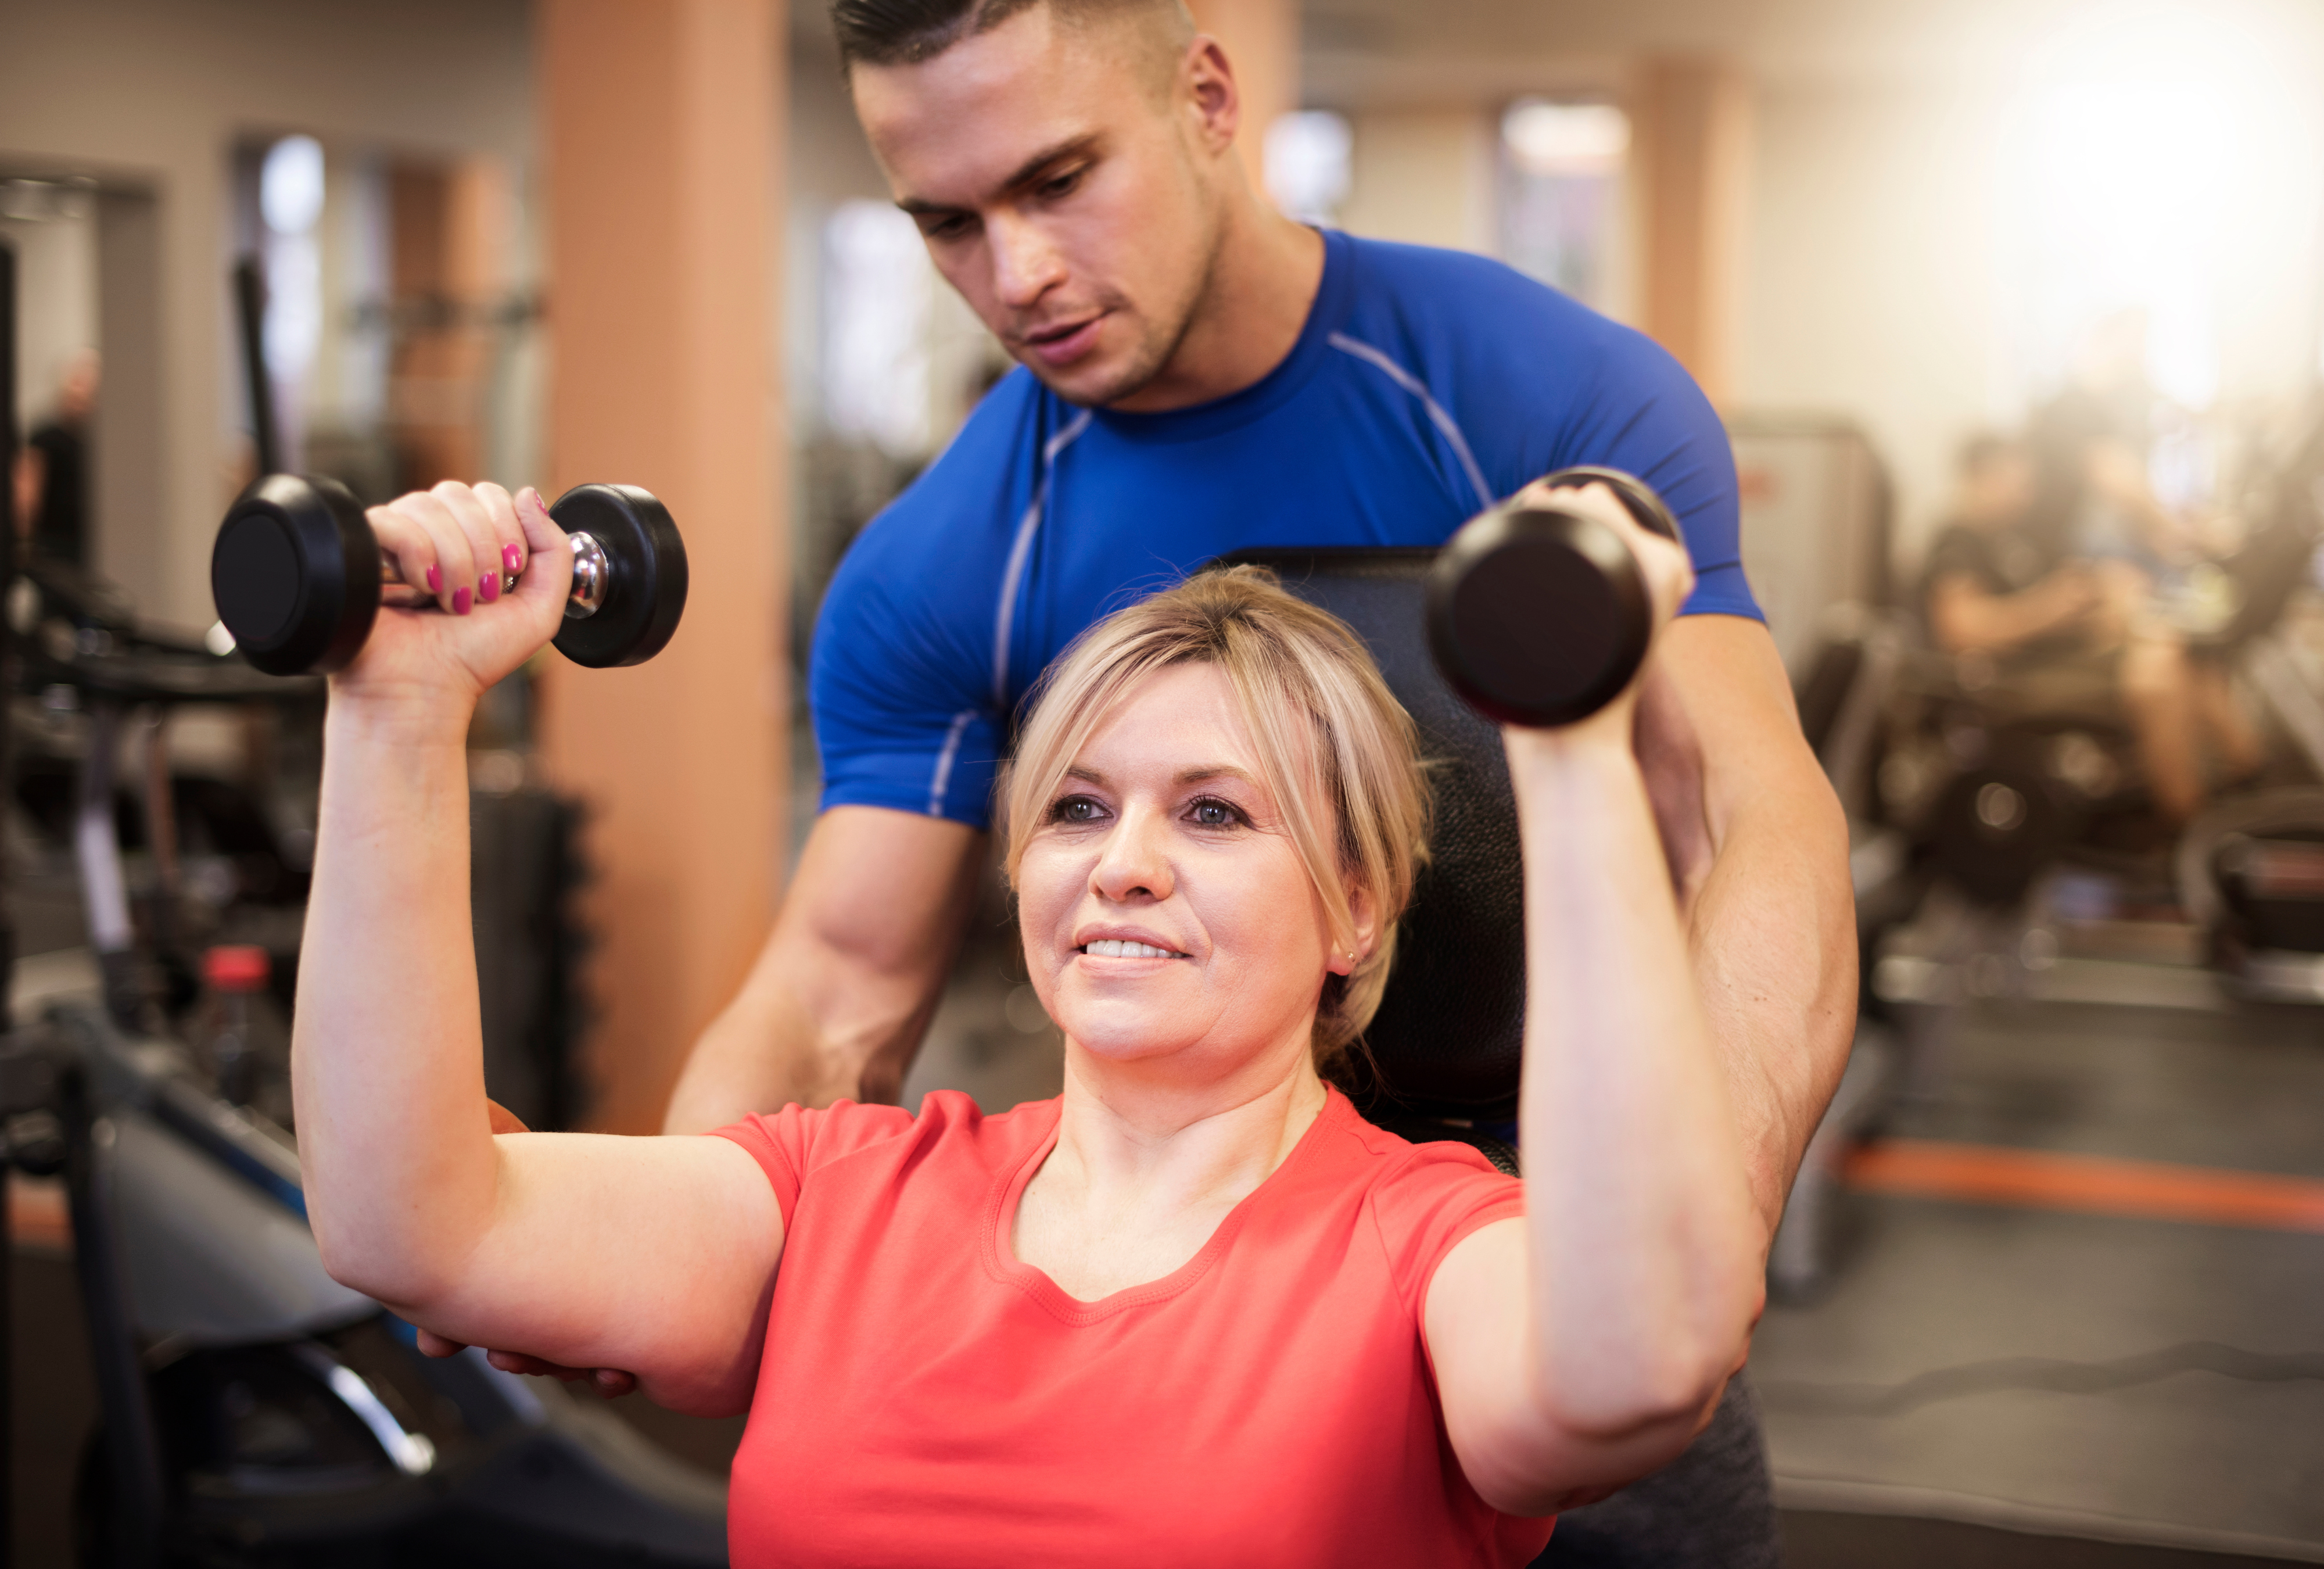 A personal trainer helps a woman lift weights as part of Weigh to Change